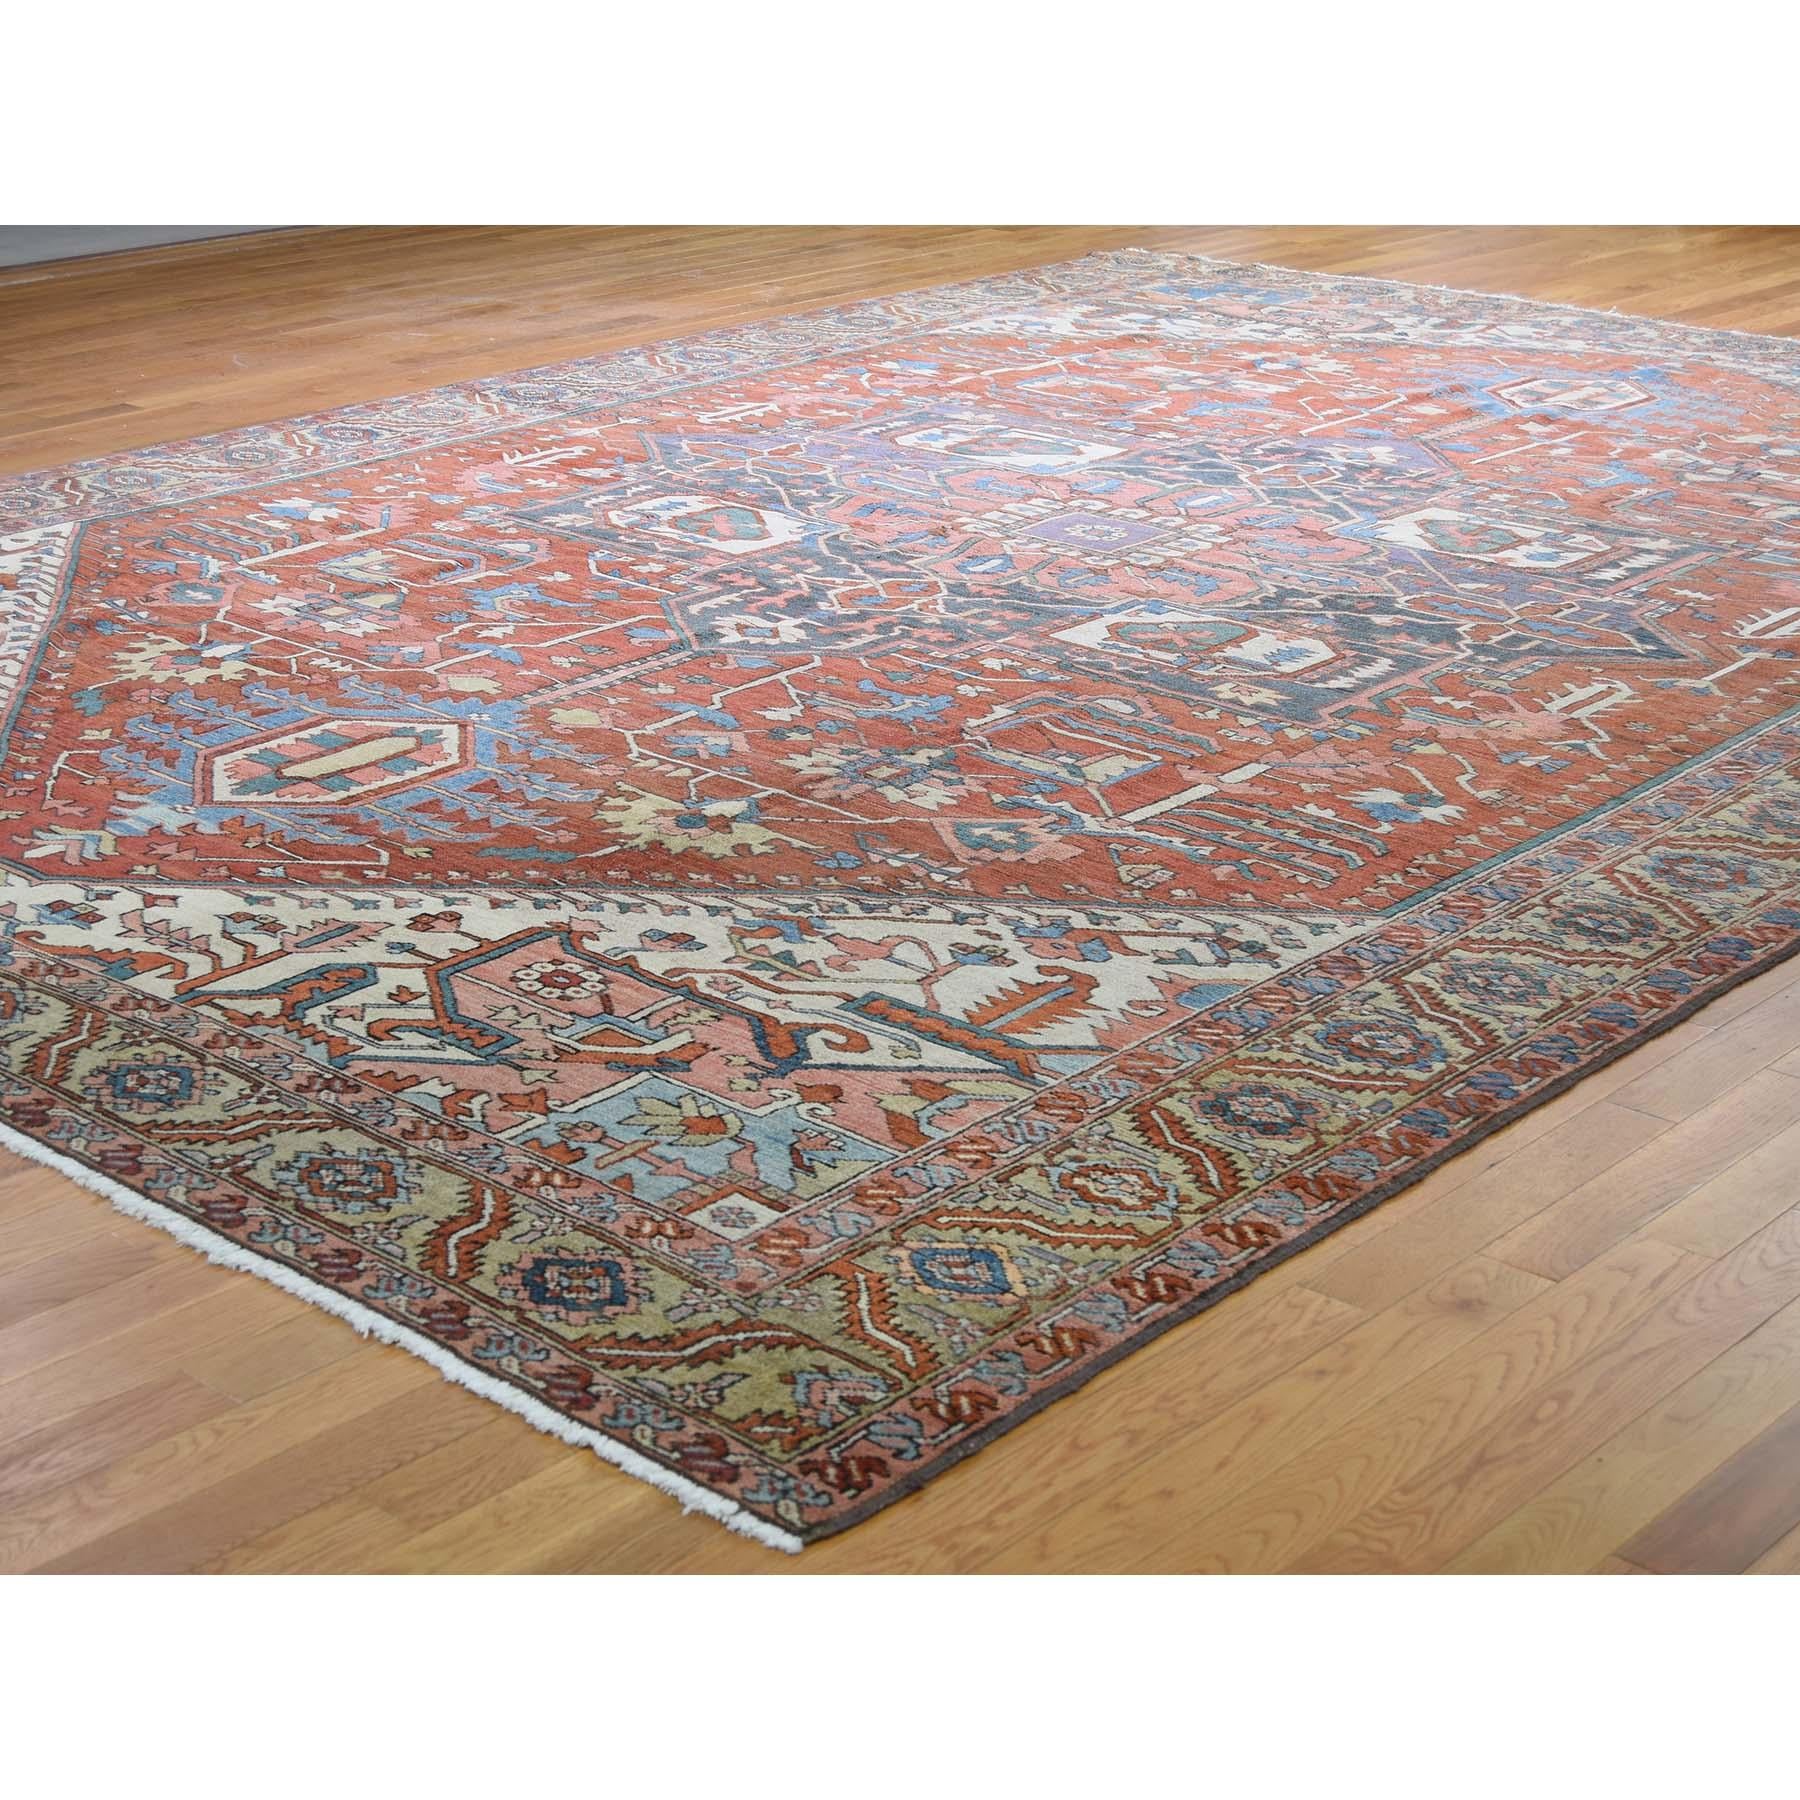 Hand-Knotted Persian Serapi Heriz Excellent Condition Hand Knotted Oversize Oriental Rug